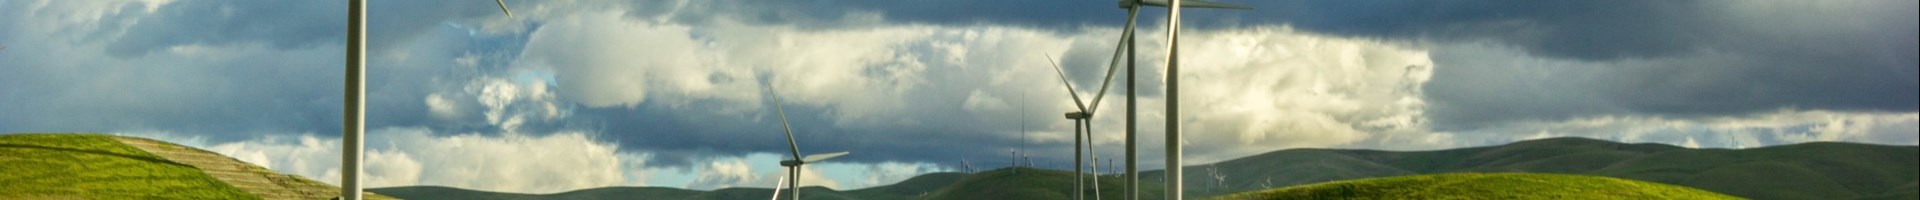 A Storm Blows Over Pacheco Pass As Wind Turbines Provide Clean Energy For California T20 Yrlax6